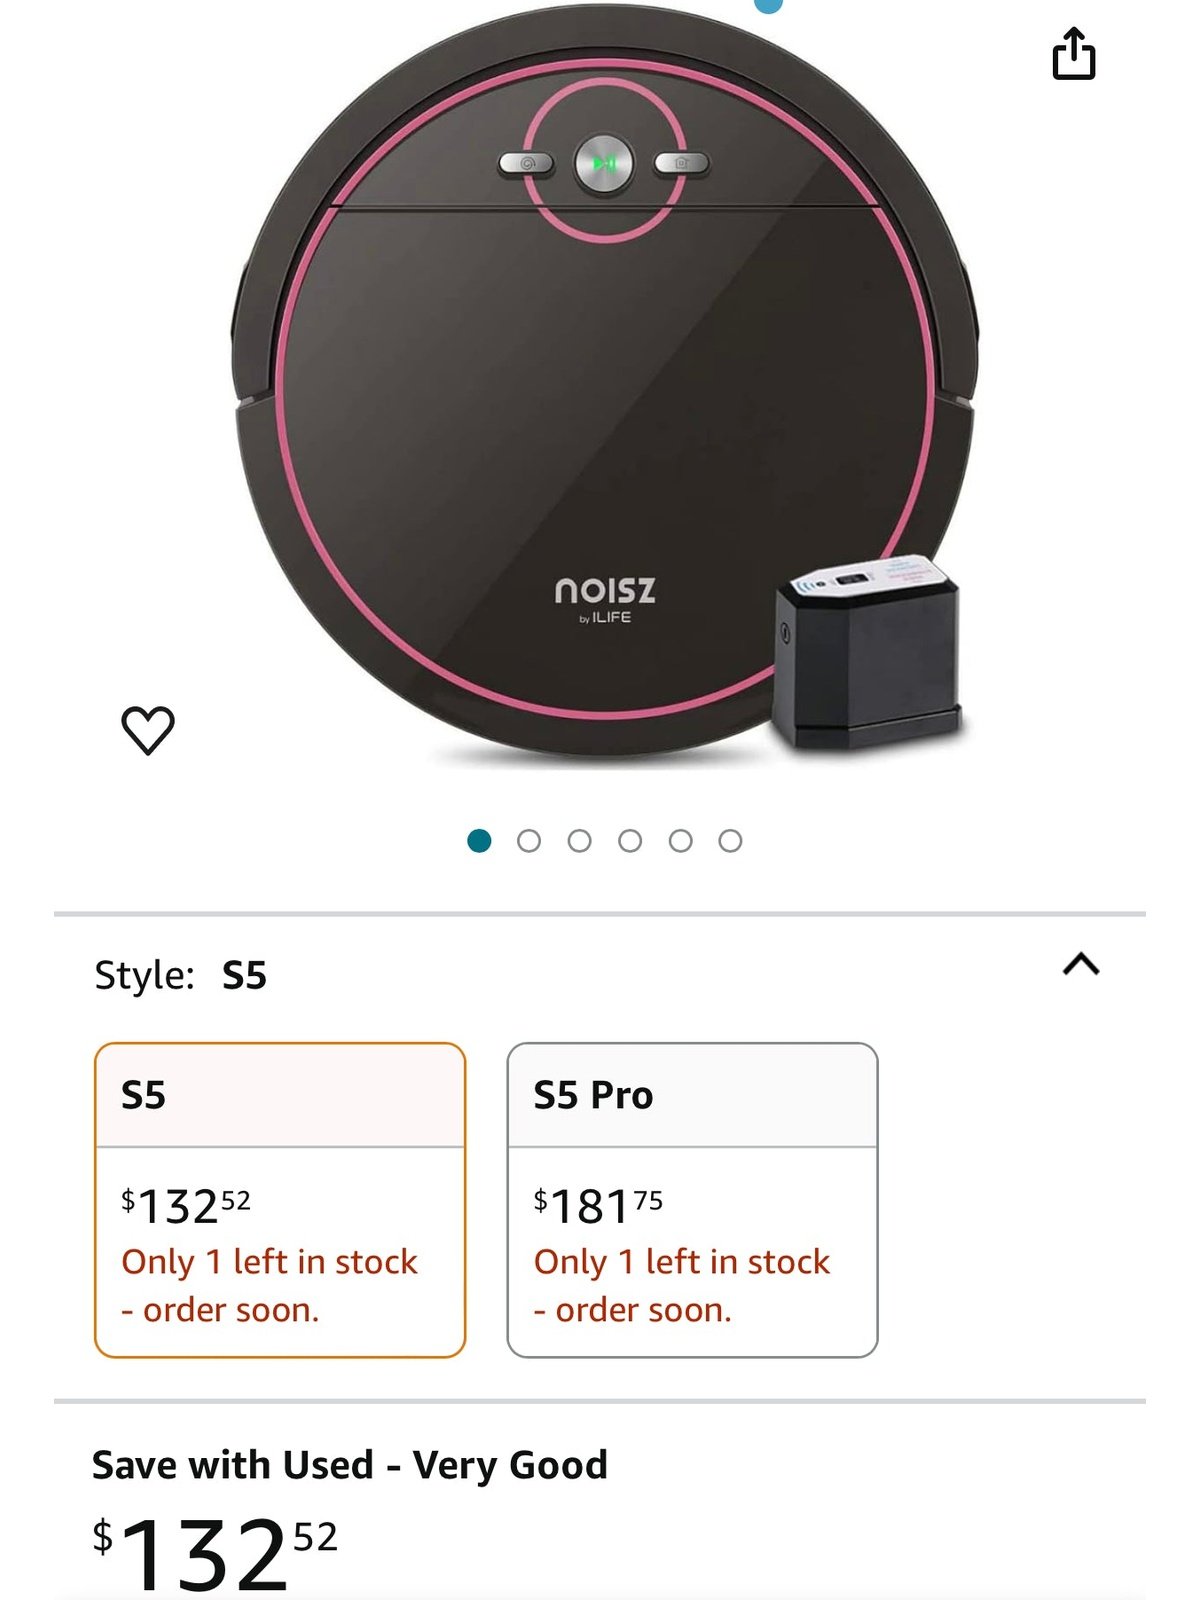 NOISZ by ILIFE S5 Robot Vacuum Cleaner, ElectroWall, Tangle-Free Suction Port, Quiet, Automatic Self-Charging Ideal for Pet Care, Hard Floor and Low Pile Carpet, Black